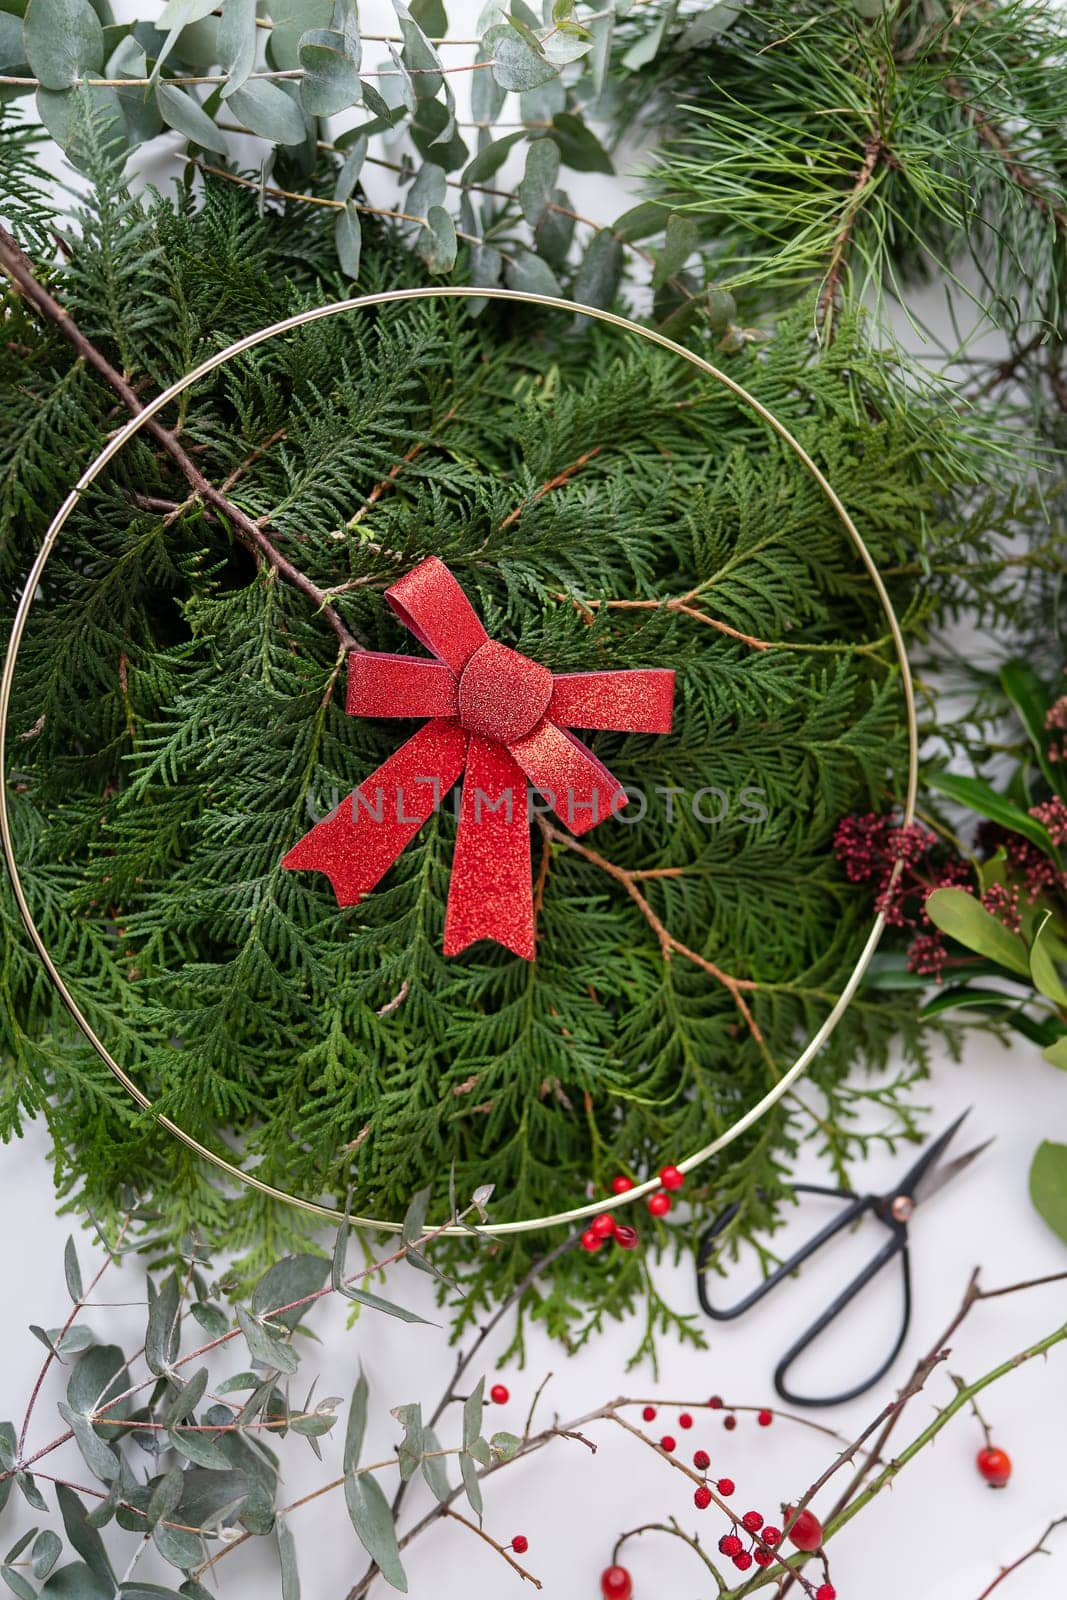 Christmas wreath with red bow and berries on a white background with greenery and scissors